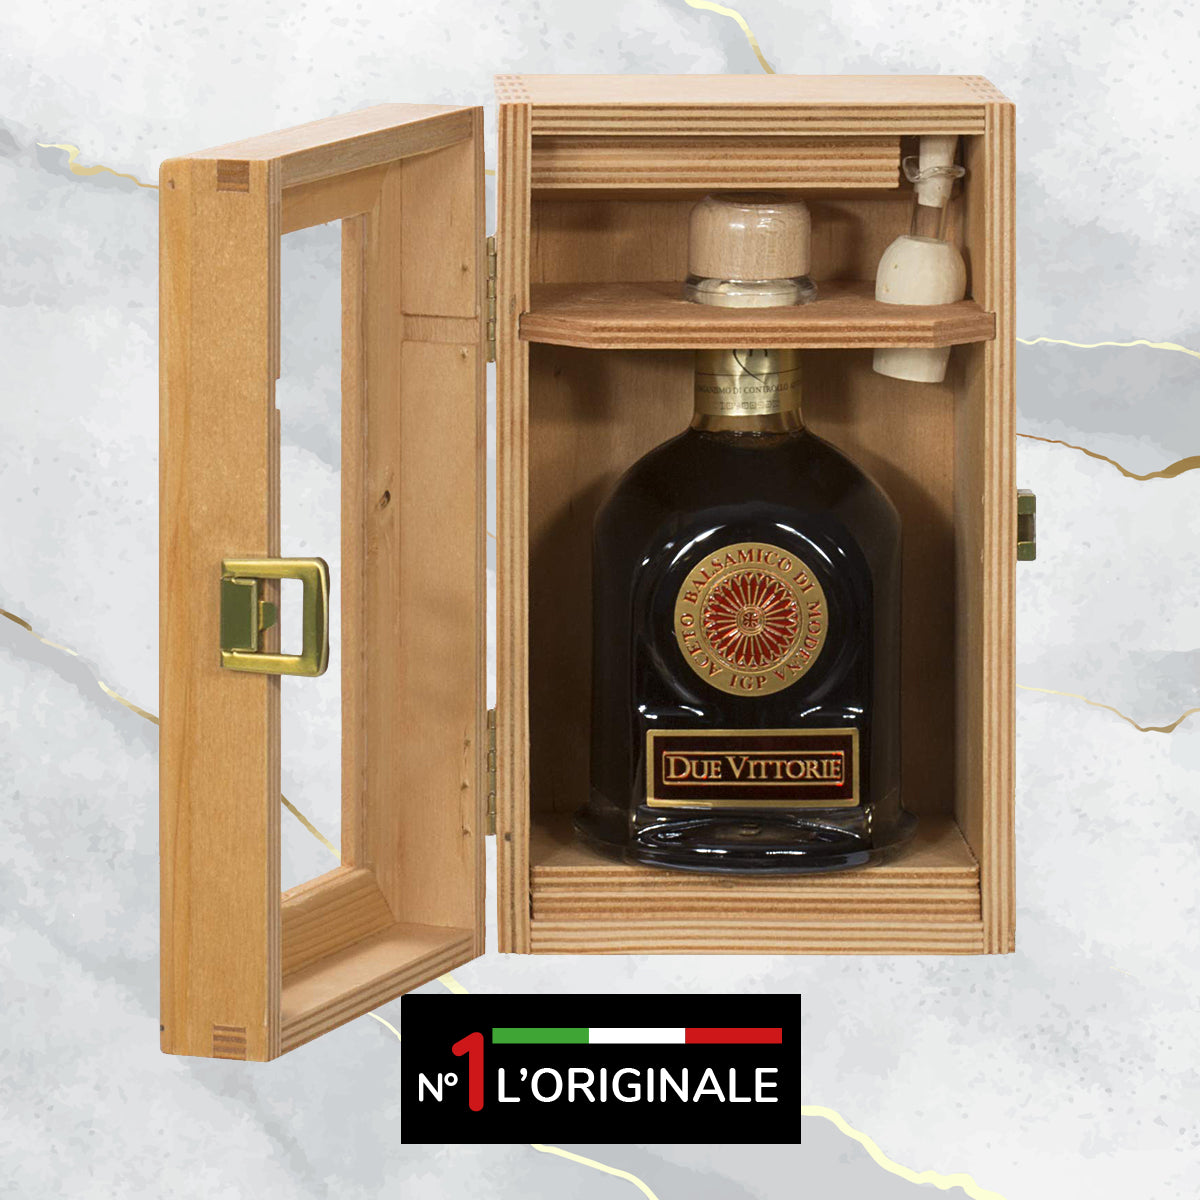 Due Vittorie Oro Gold Balsamic Vinegar Special Edition - with Pourer in Wooden Gift Box - 8.45fl oz/250ml